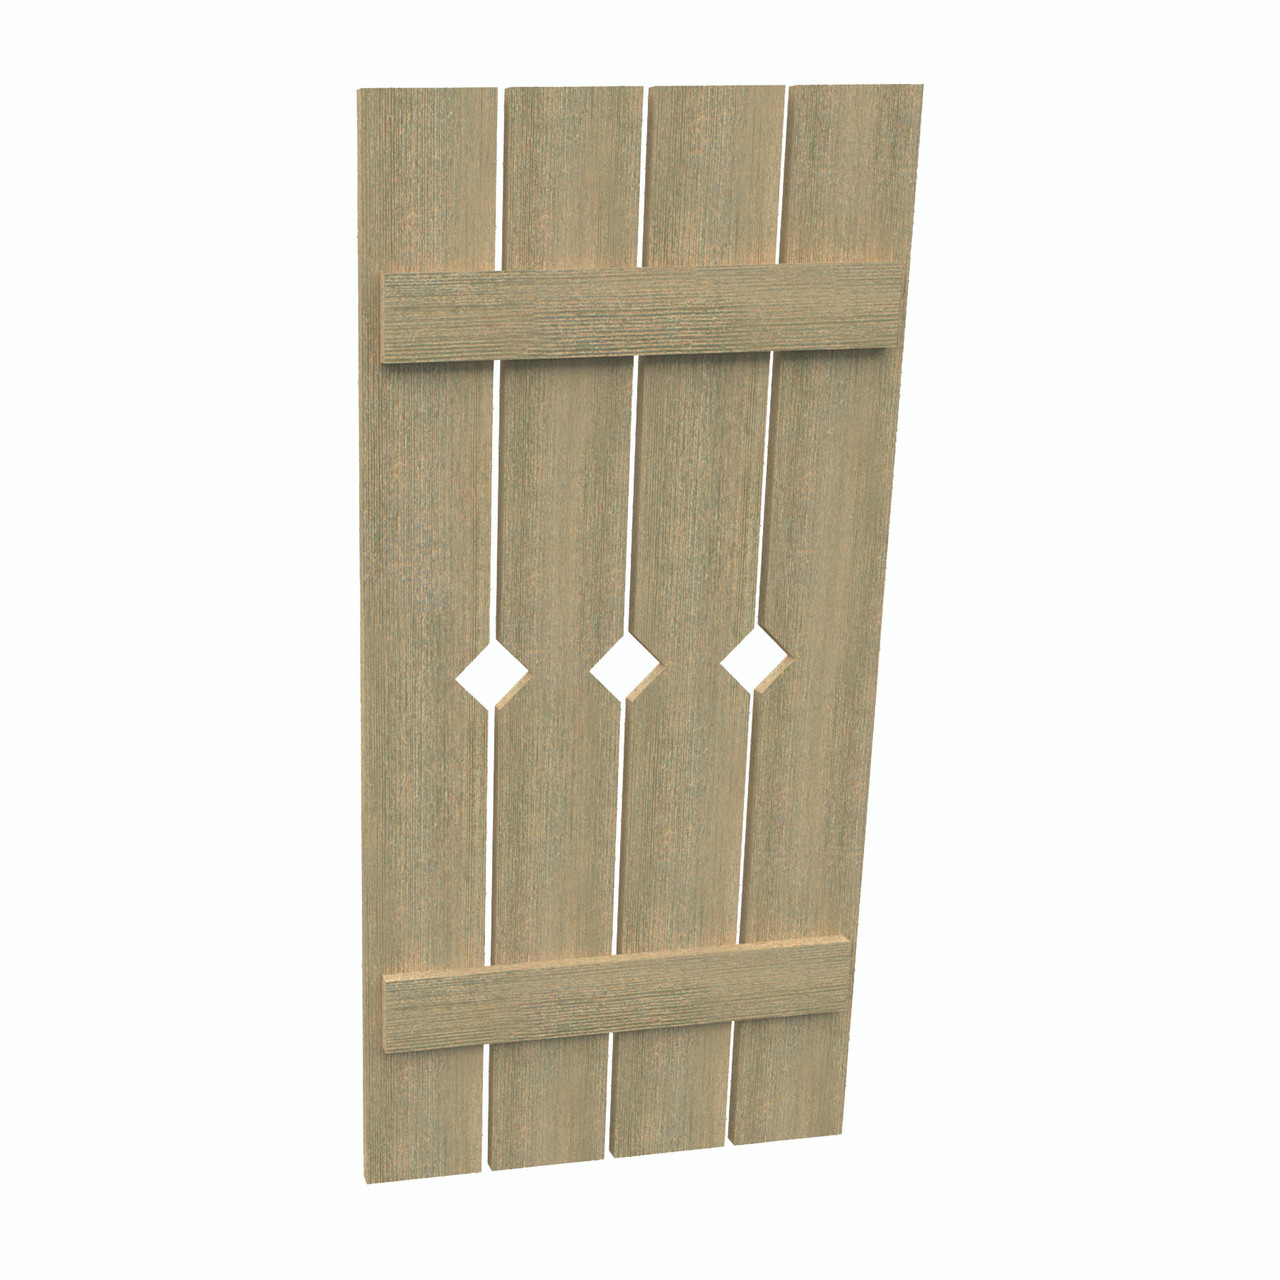 24 inch by 31 inch Plank Shutter with 4-Plank, Diamond